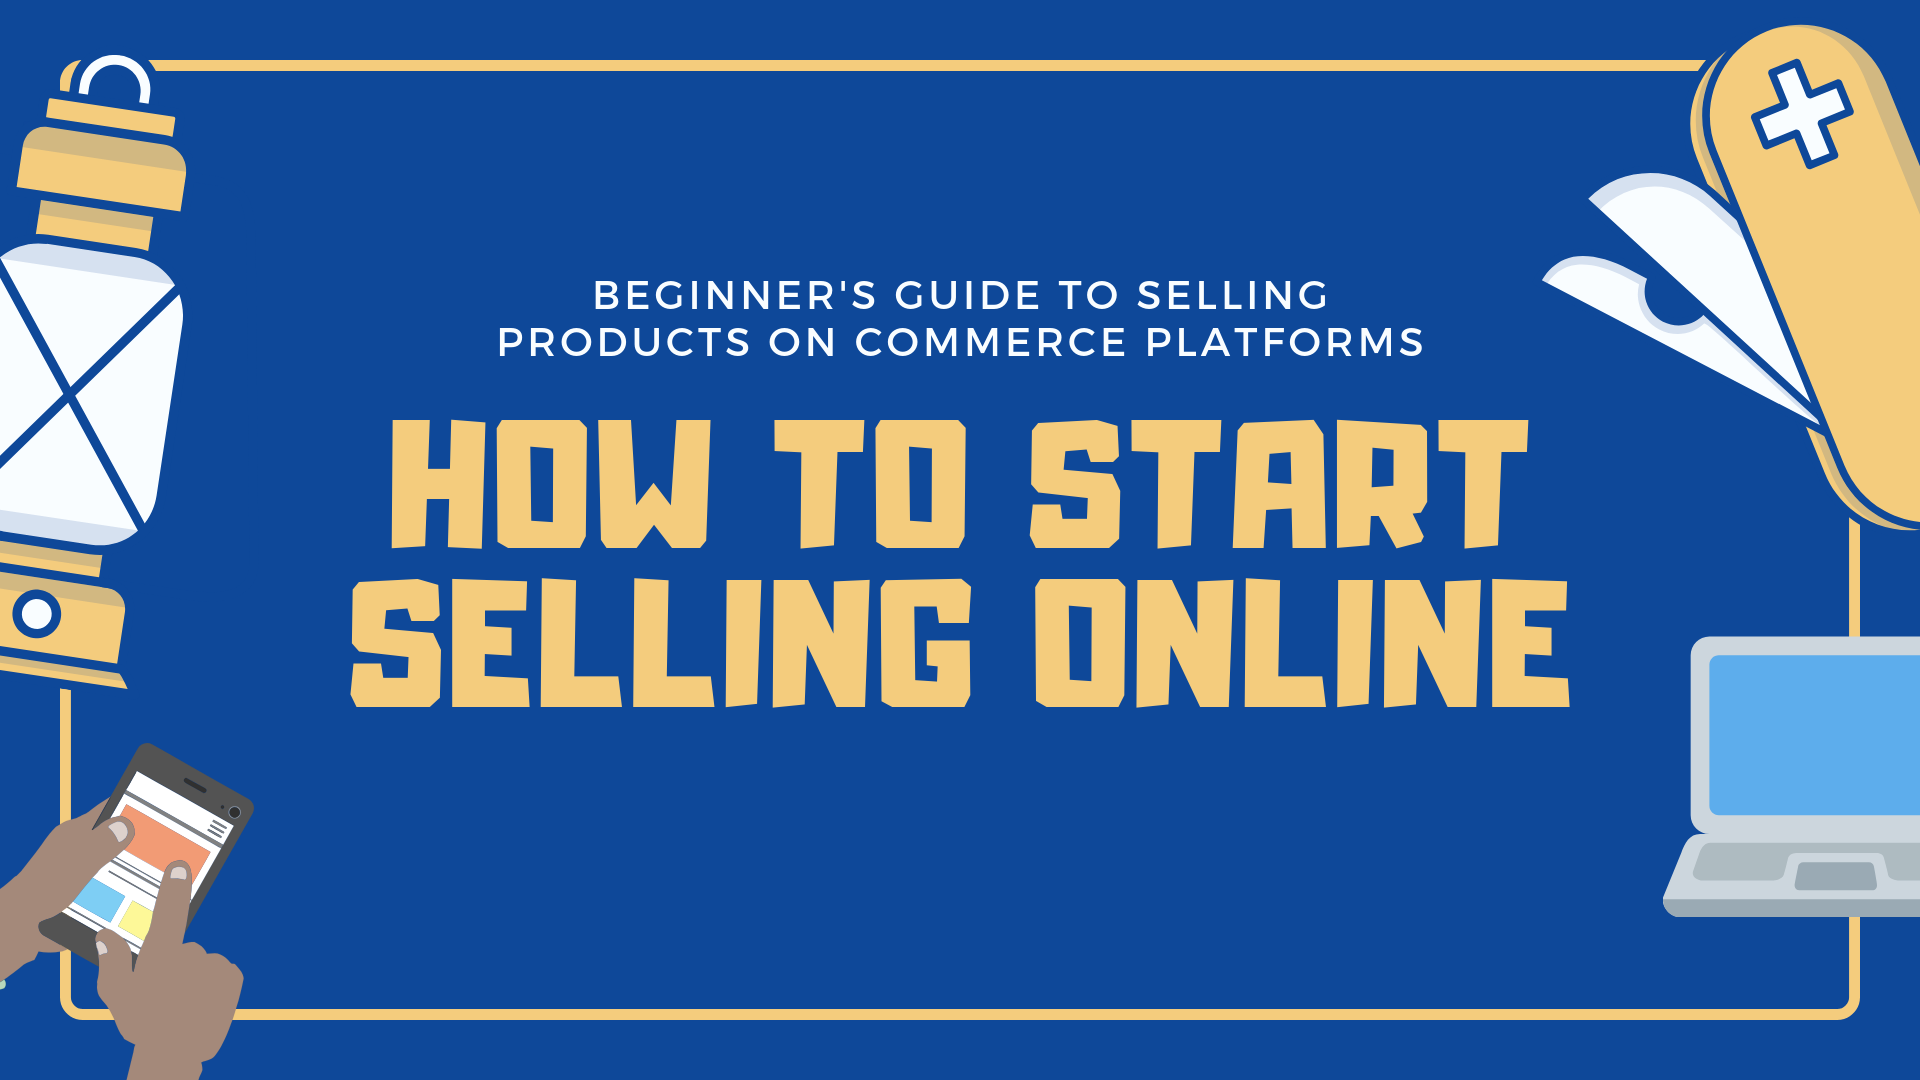 How To Start Selling Online with eBay, Amazon, Shopify, Wordpress, Dropship